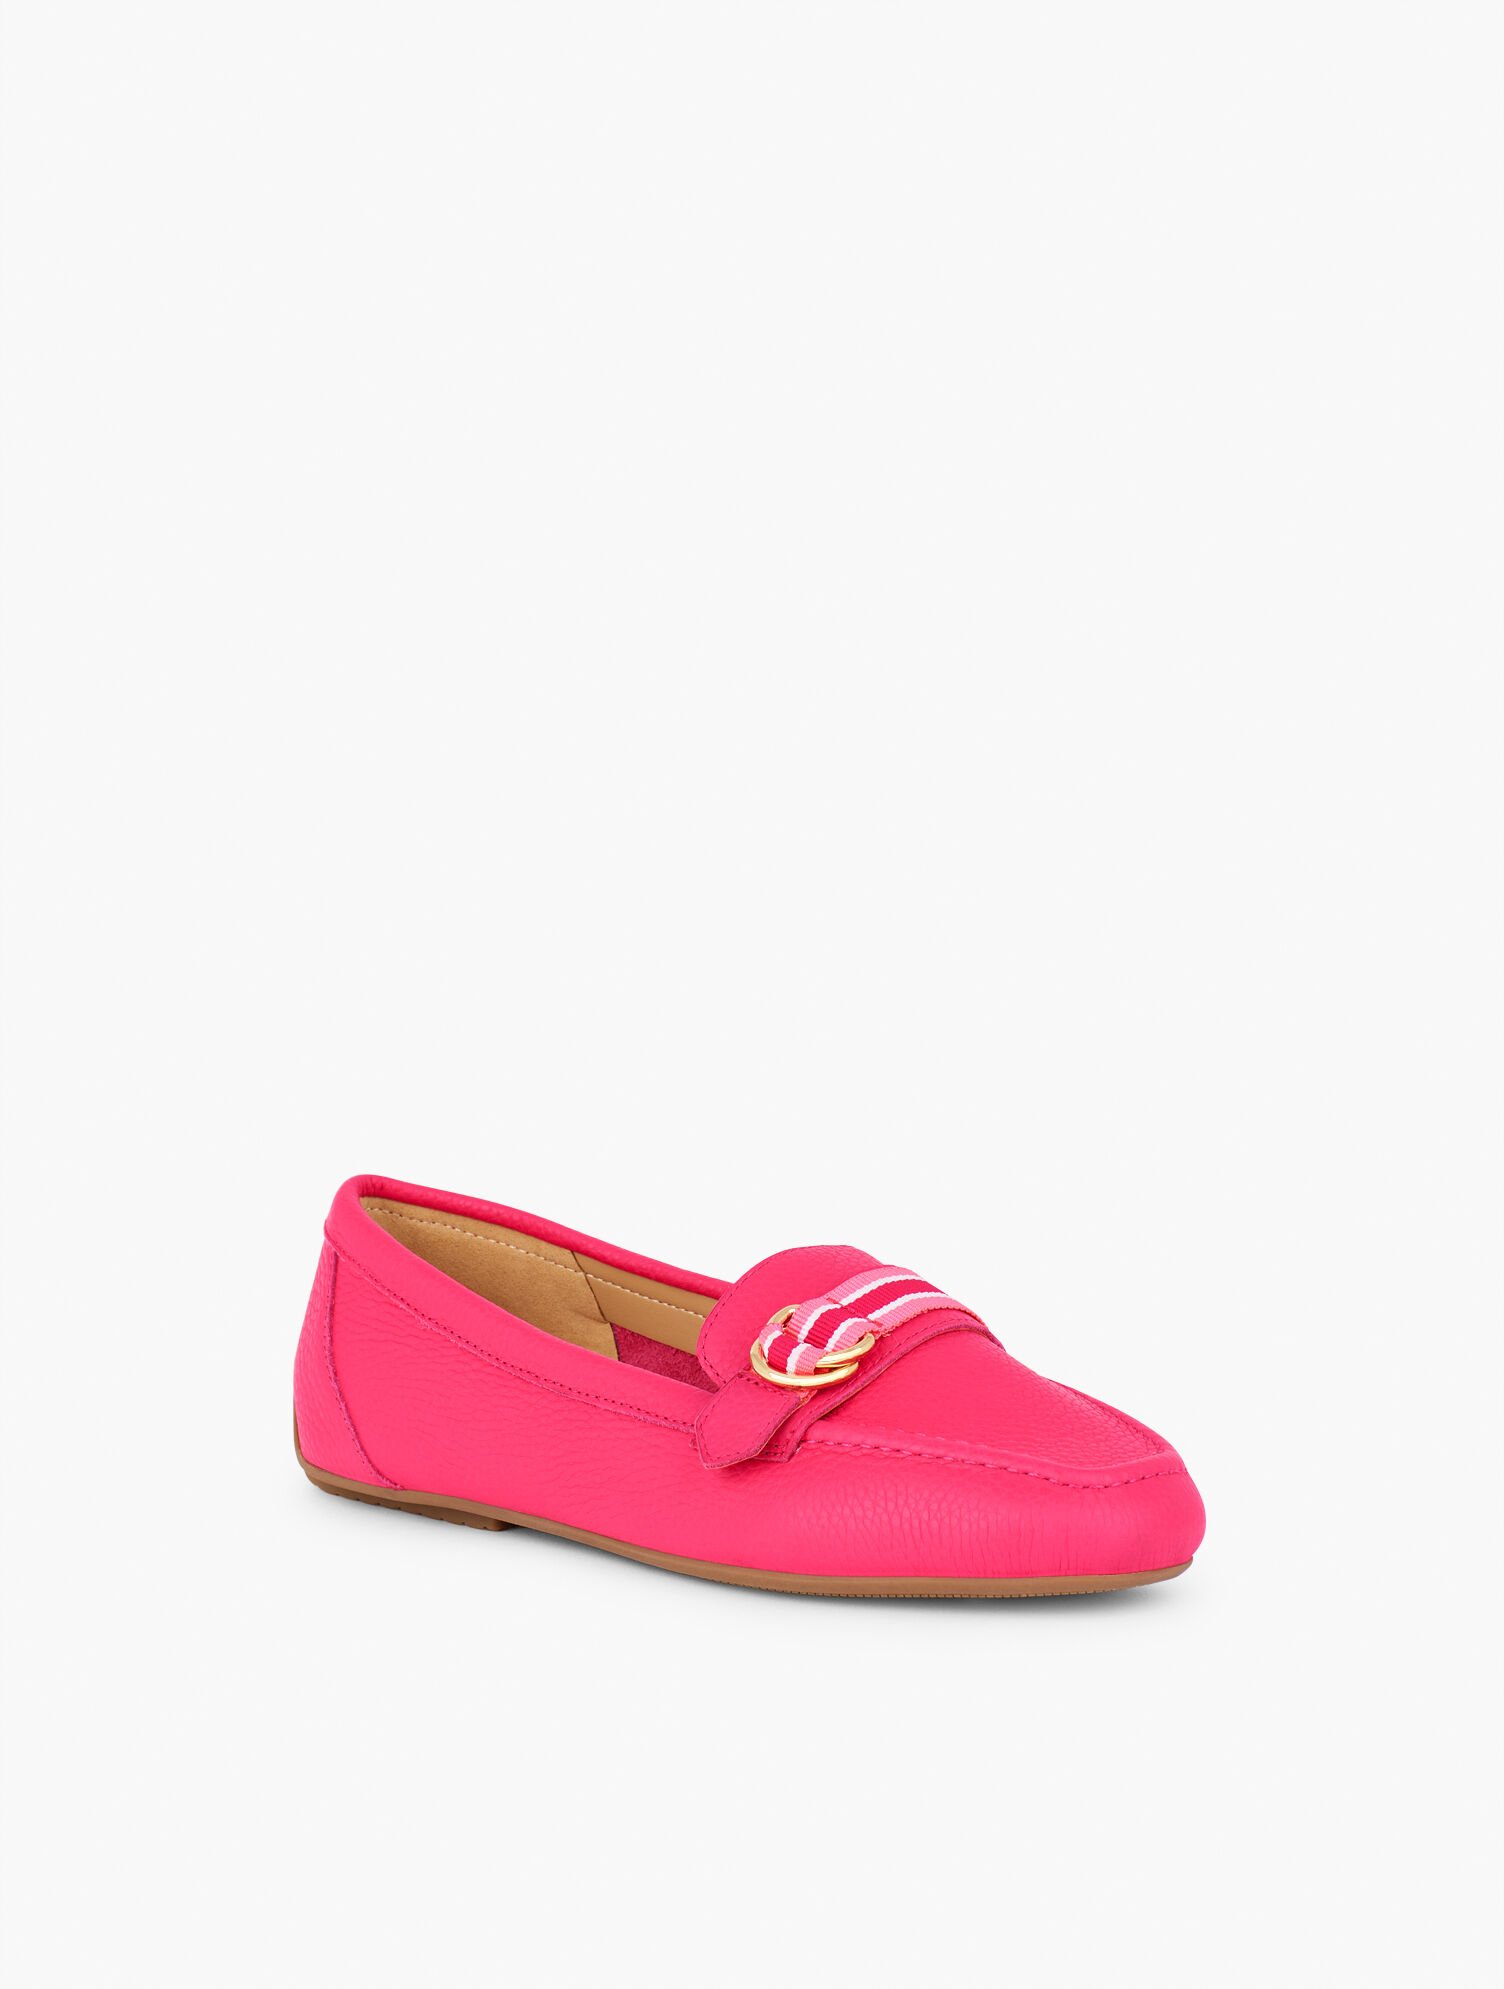 Jessie Pebbled Leather Driving Moccasins - Grosgrain buckle | Talbots